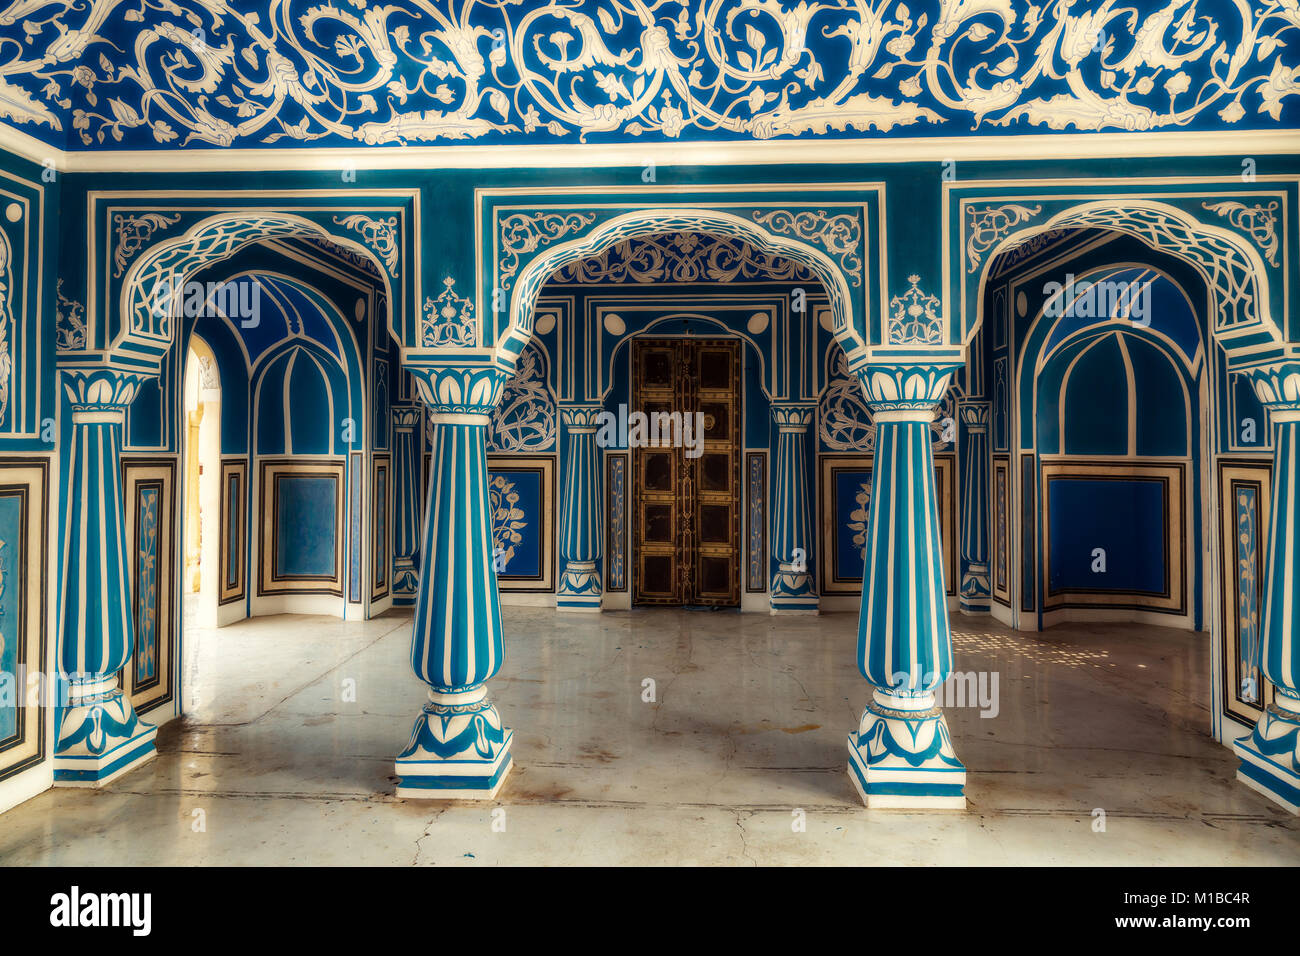 City Palace Jaipur Rajasthan. View of Royal palace hallway with wall art  paintings and floral patterns Stock Photo - Alamy